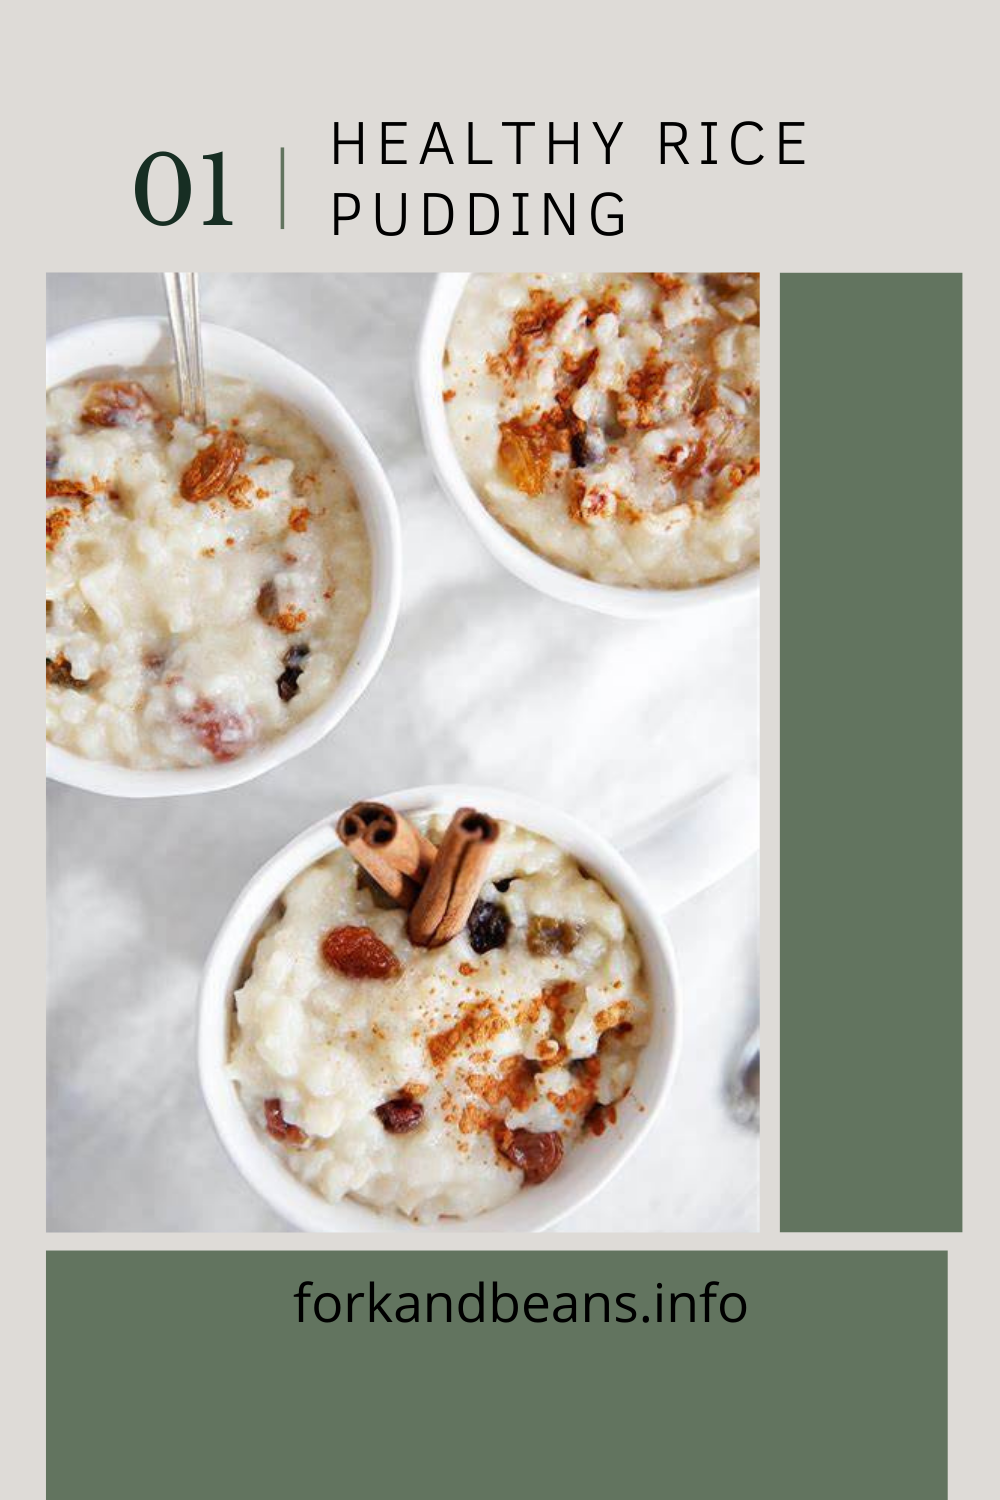 August's featured recipe is a nutritious rice pudding.